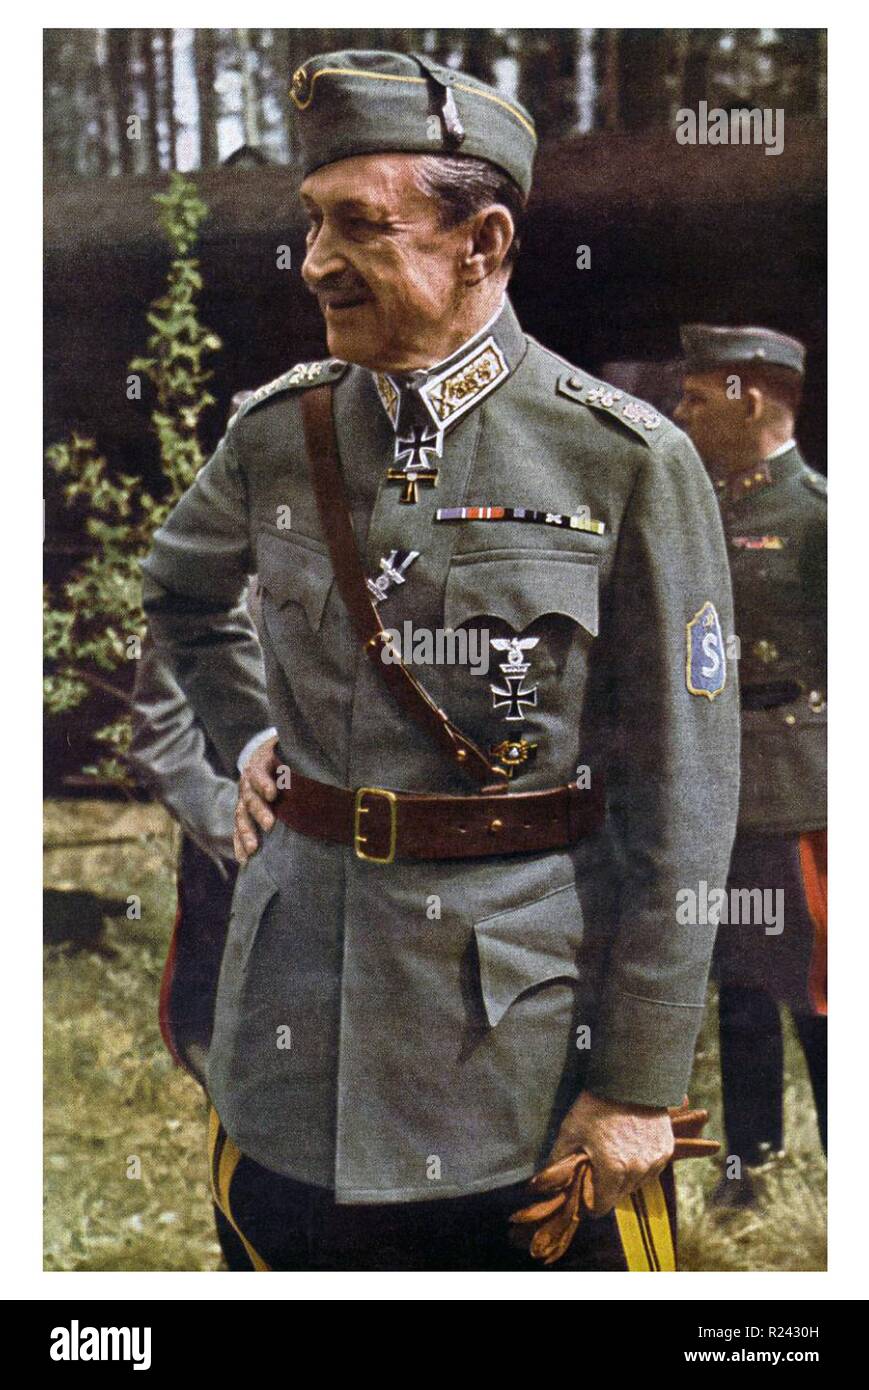 Carl Mannerheim (1867-1951) Finnish military leader and statesman. served as military leader of the Whites in the Finnish Civil War, Regent of Finland (1918-1919), commander-in-chief of Finland's defence forces during World War II, President of Finland (1944-1946). c.1941 Stock Photo